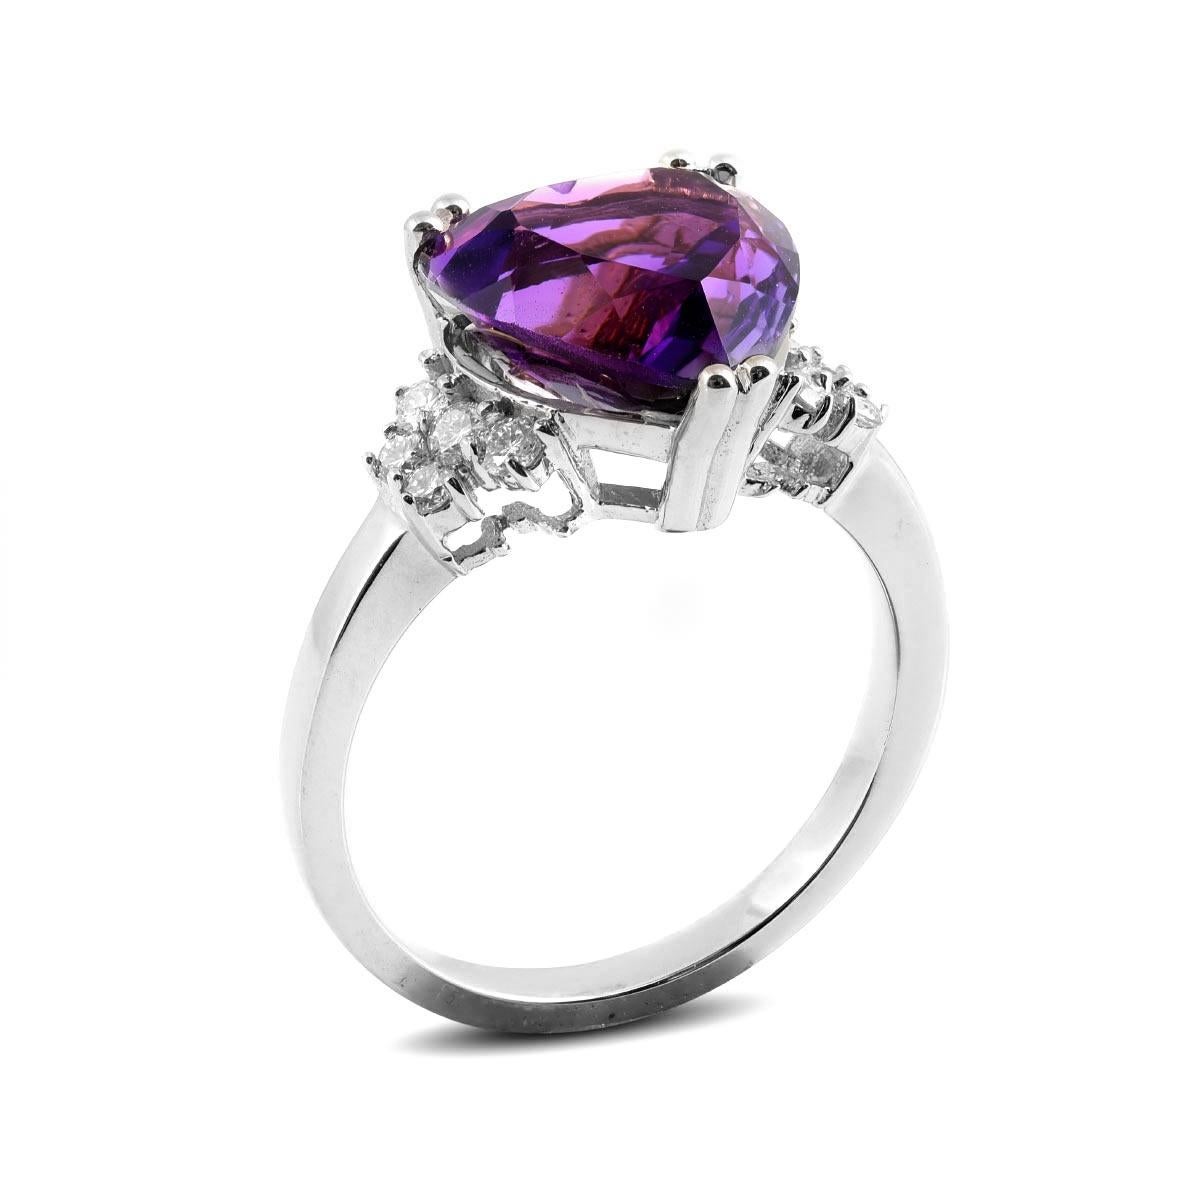 A natural gemstone that has been cut to perfection, here is a heart shaped Amethyst that has the most royal purple you could ever imagine. Rich and full of life, this contemporary choice has a 3.55 carat gemstone that sits well upon any hand. With